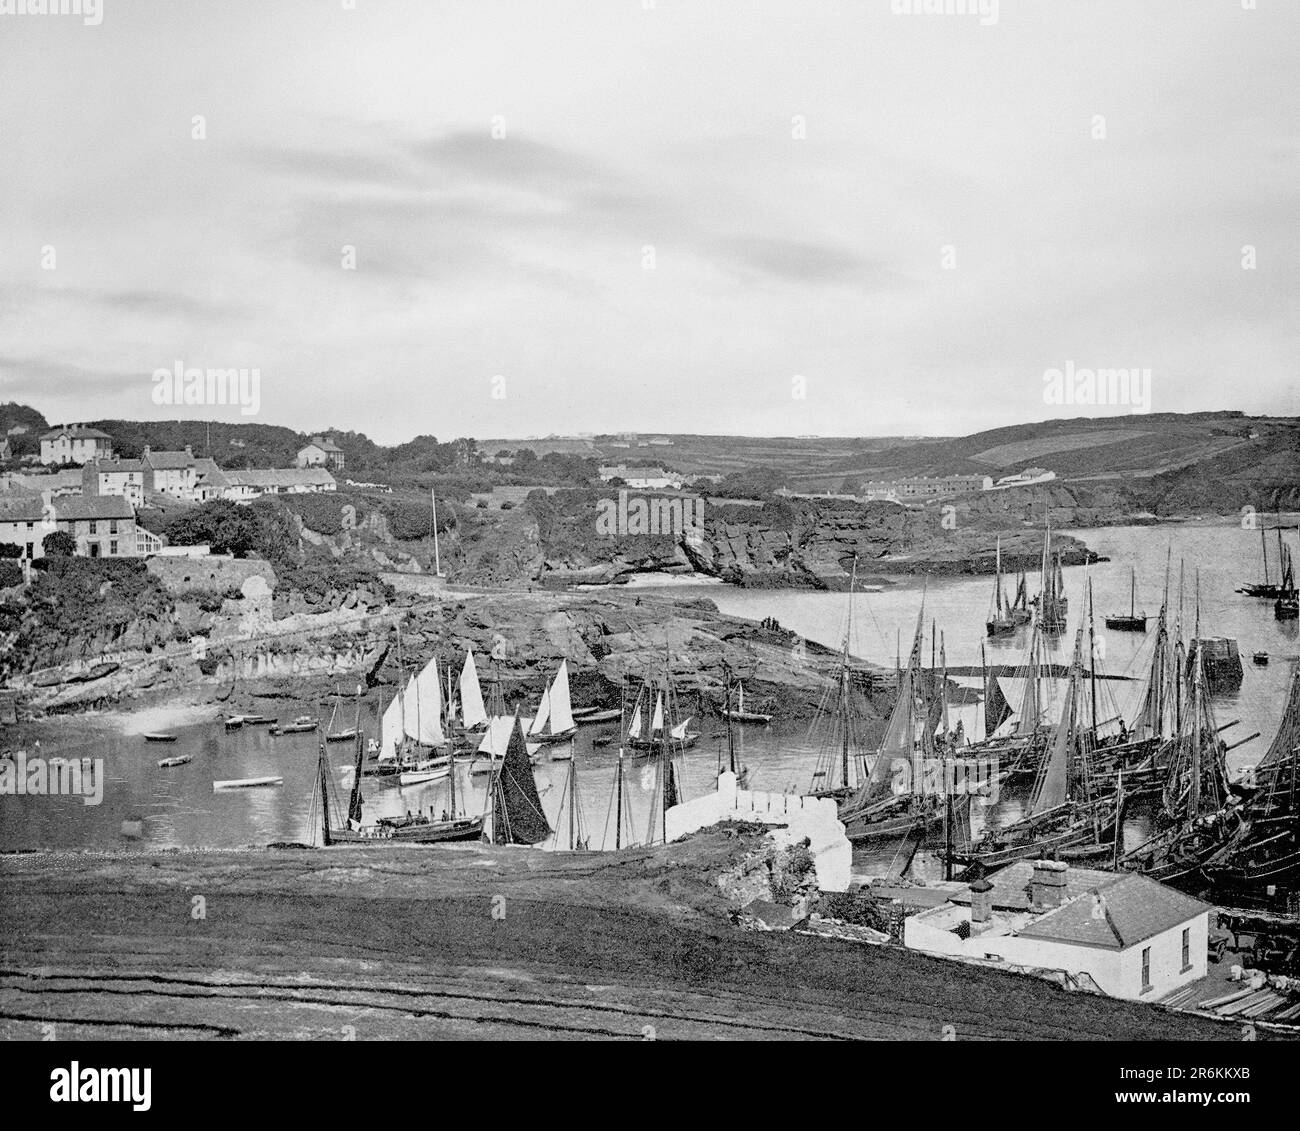 A late 19th century view of many fishing boats (or smacks) in Dunmore East, a popular tourist and fishing village situated on the west side of Waterford Harbour on Ireland's southeastern coast. Stock Photo